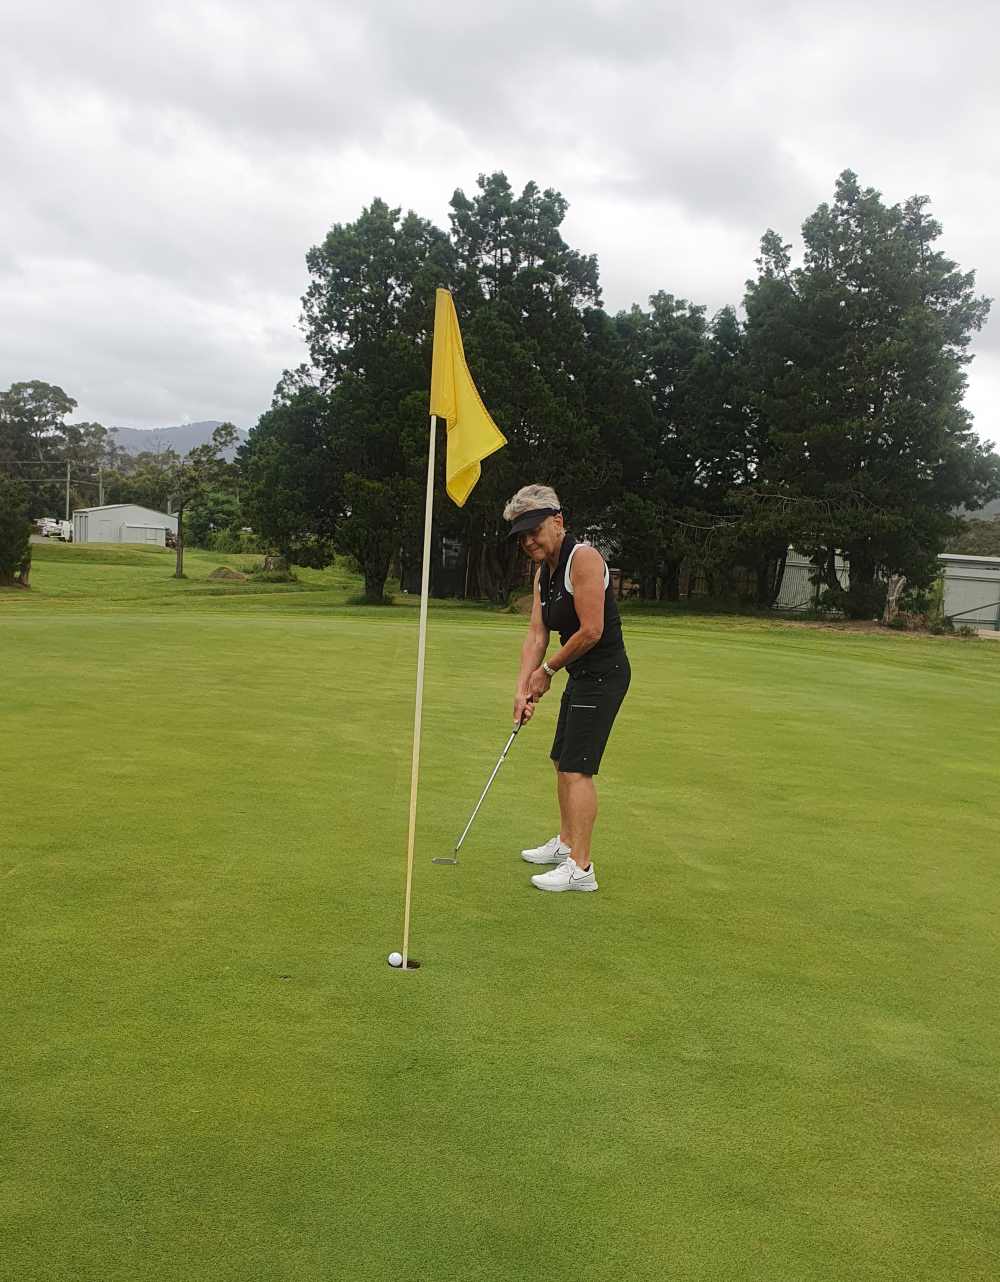 image of Lindy playing golf. Playing golf was a goal for Lindy following her diagnosis of ovarian cancer